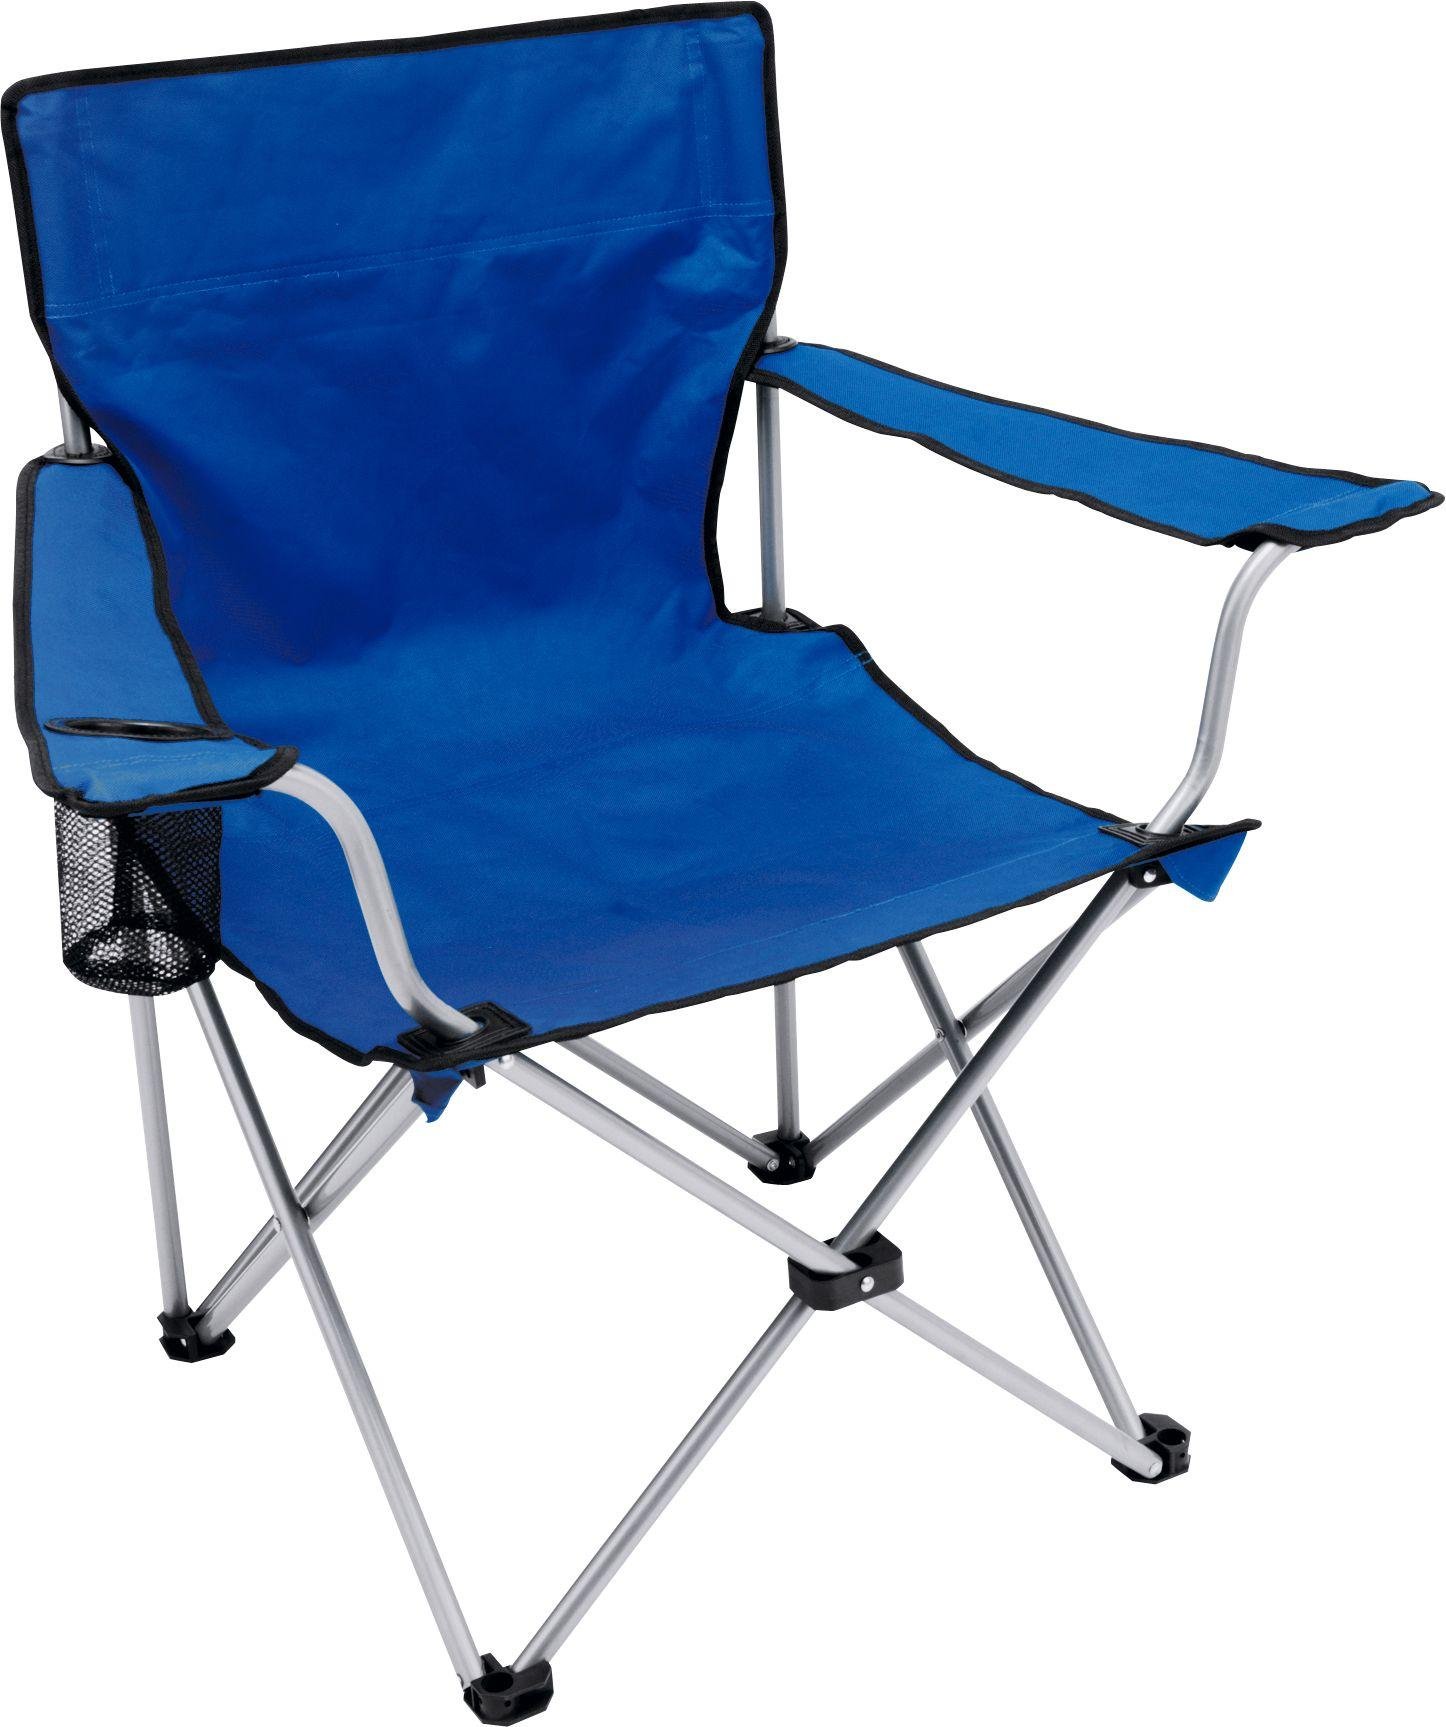 'Steel Folding Camping Chair